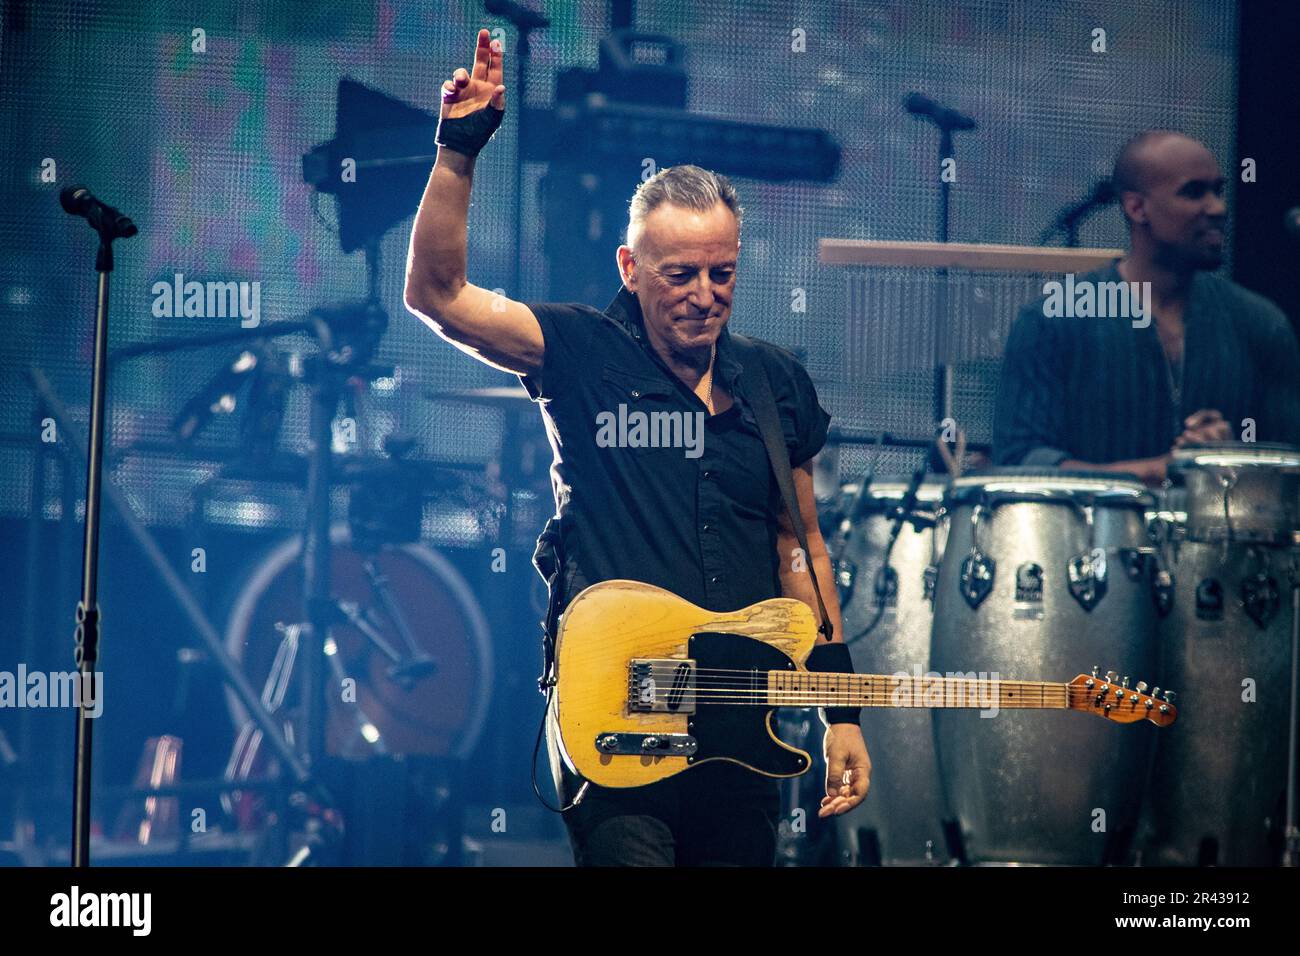 Amsterdam, The Netherlands. May 25, 2023.  Bruce Springsteen performs with The E Street Band in the Johan Cruijff ArenA during a European stadium tour The Boss. ANP PAUL BERGEN netherlands out - belgium out/Alamy Live News Stock Photo